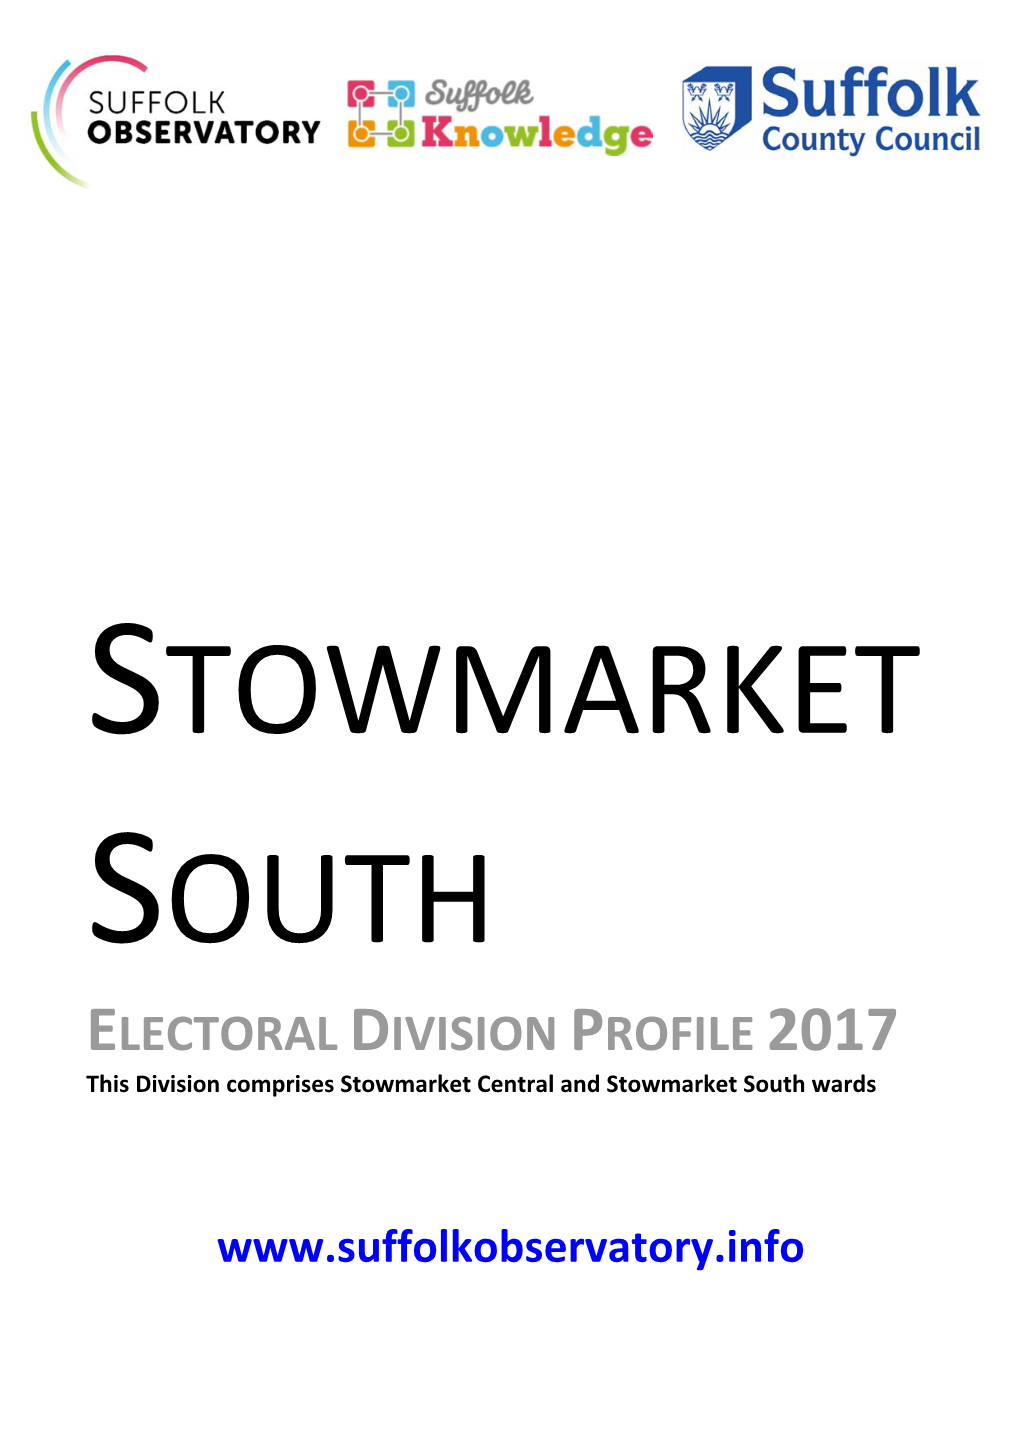 STOWMARKET SOUTH ELECTORAL DIVISION PROFILE 2017 This Division Comprises Stowmarket Central and Stowmarket South Wards